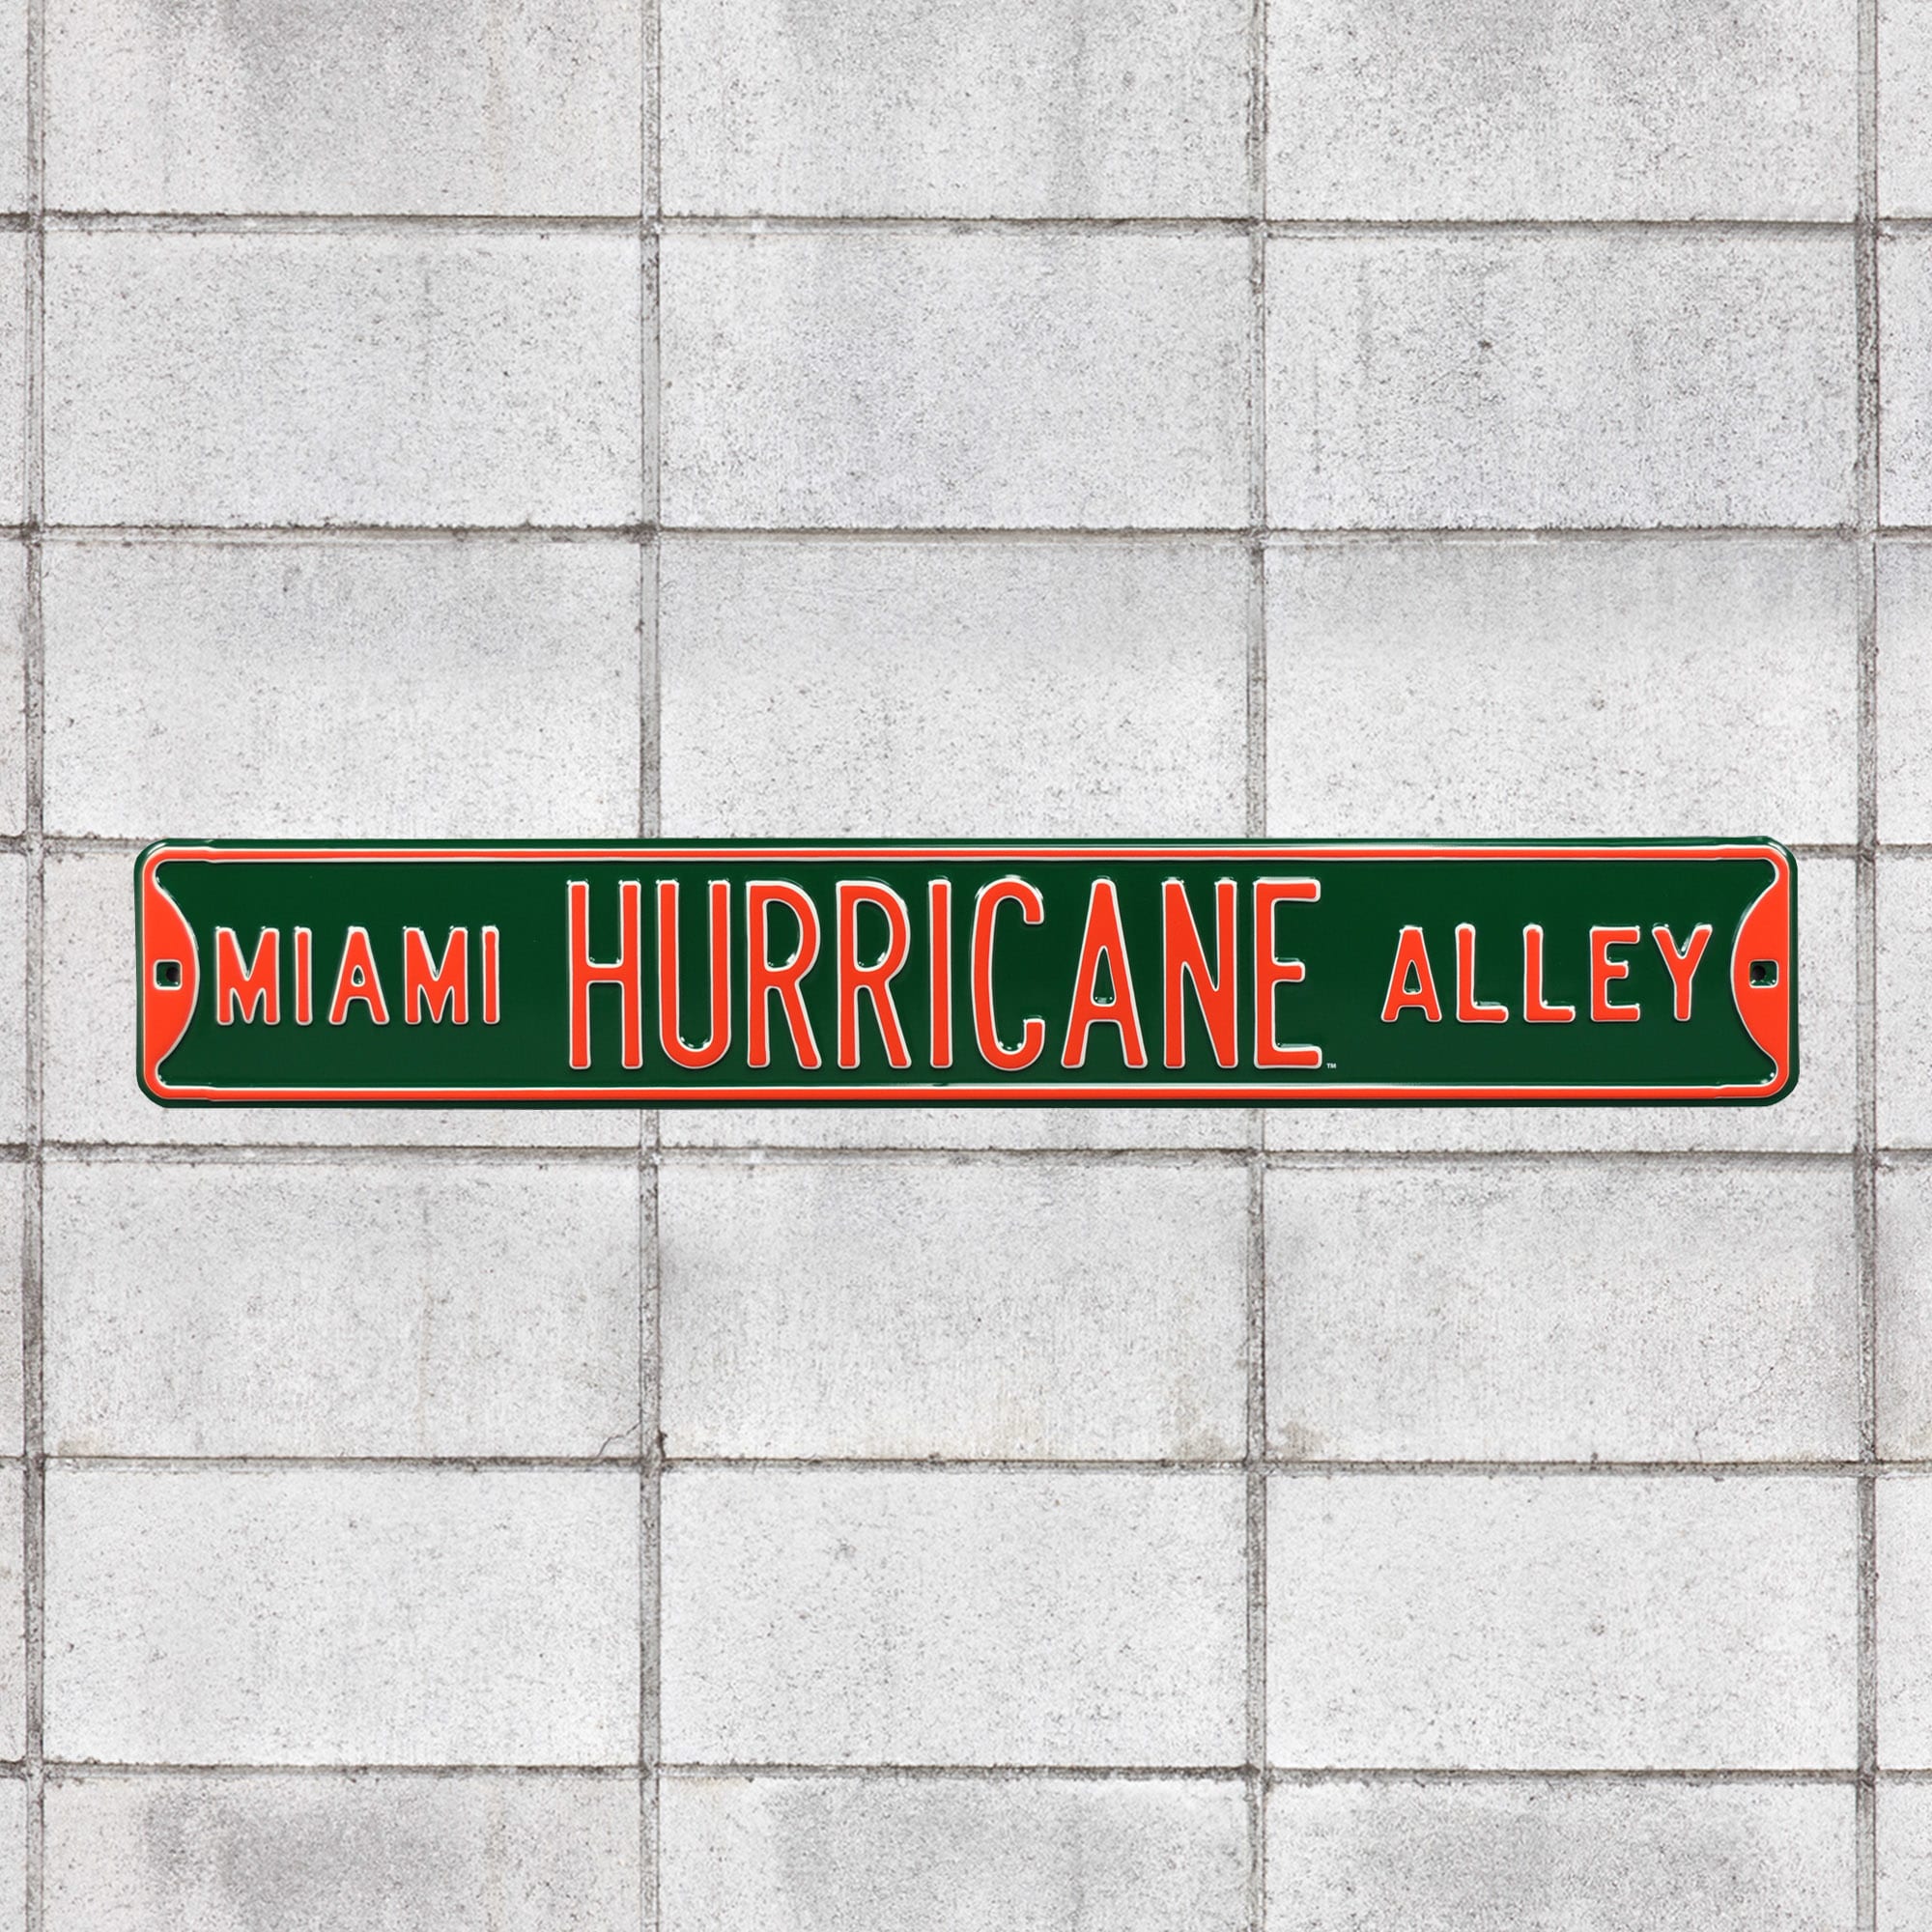 Miami Hurricanes: Hurricane Alley Parking - Officially Licensed Metal Street Sign 36.0"W x 6.0"H by Fathead | 100% Steel